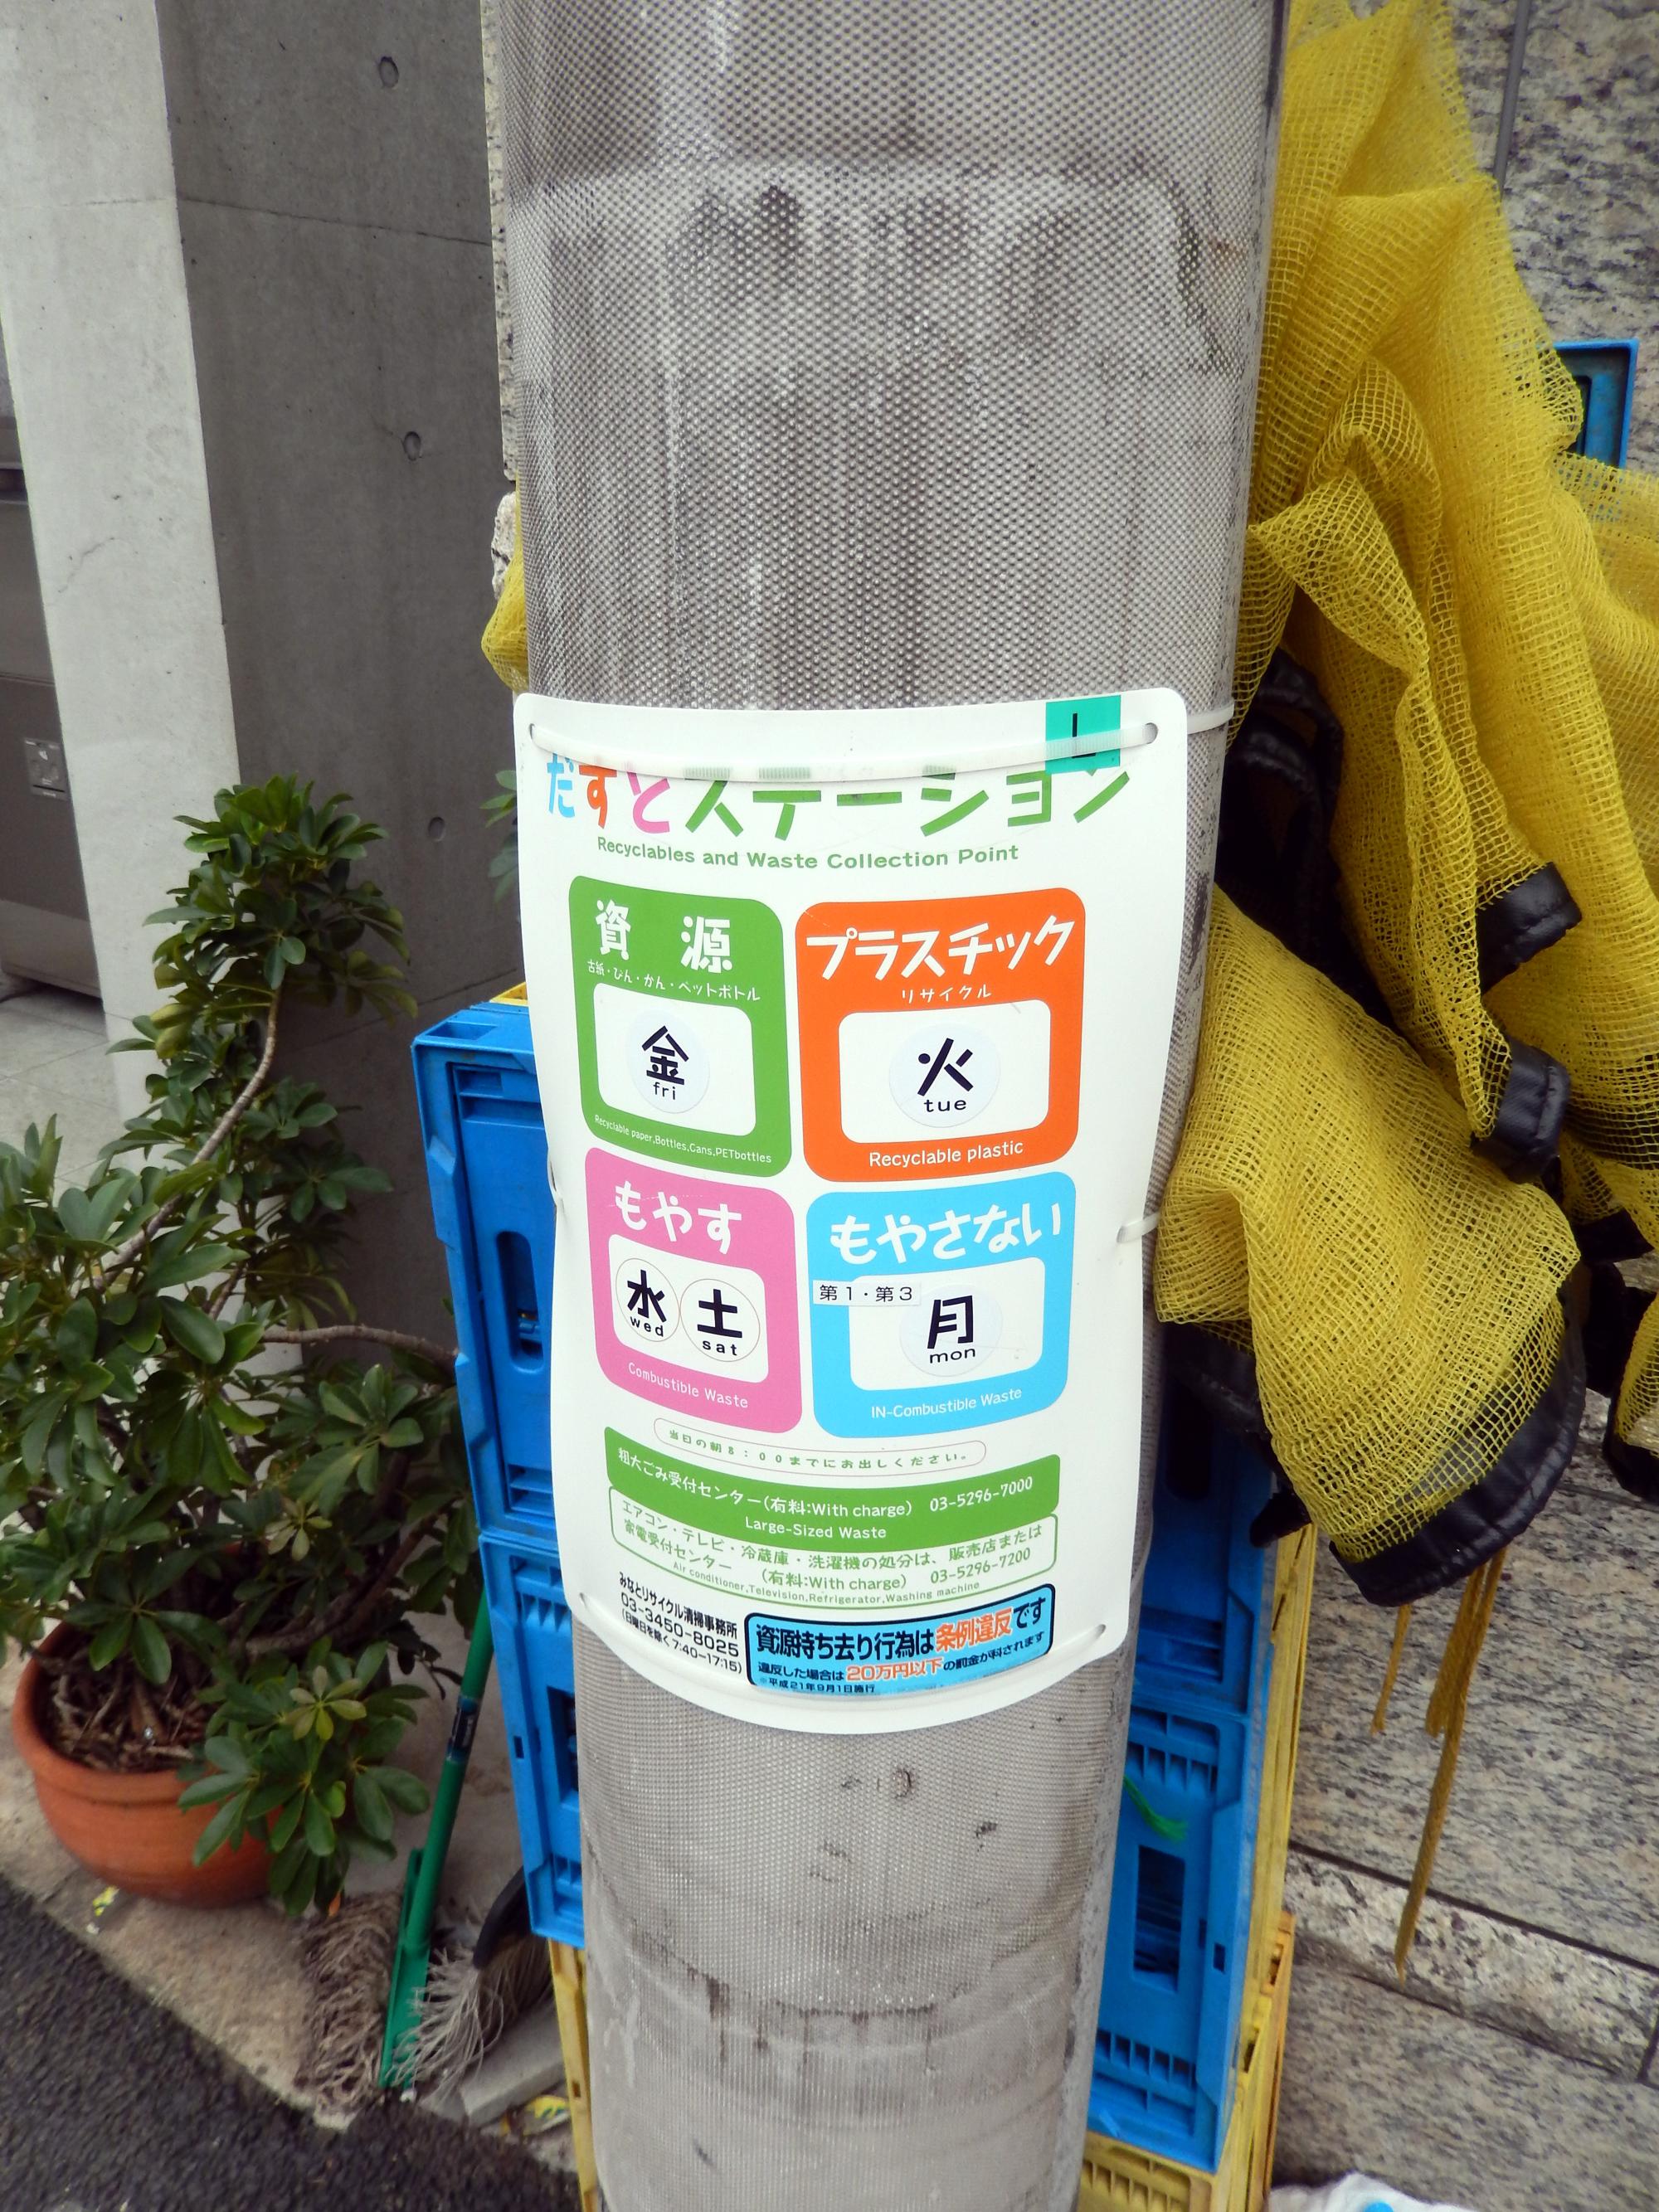 Signs Of Japan - Recycle Pickup